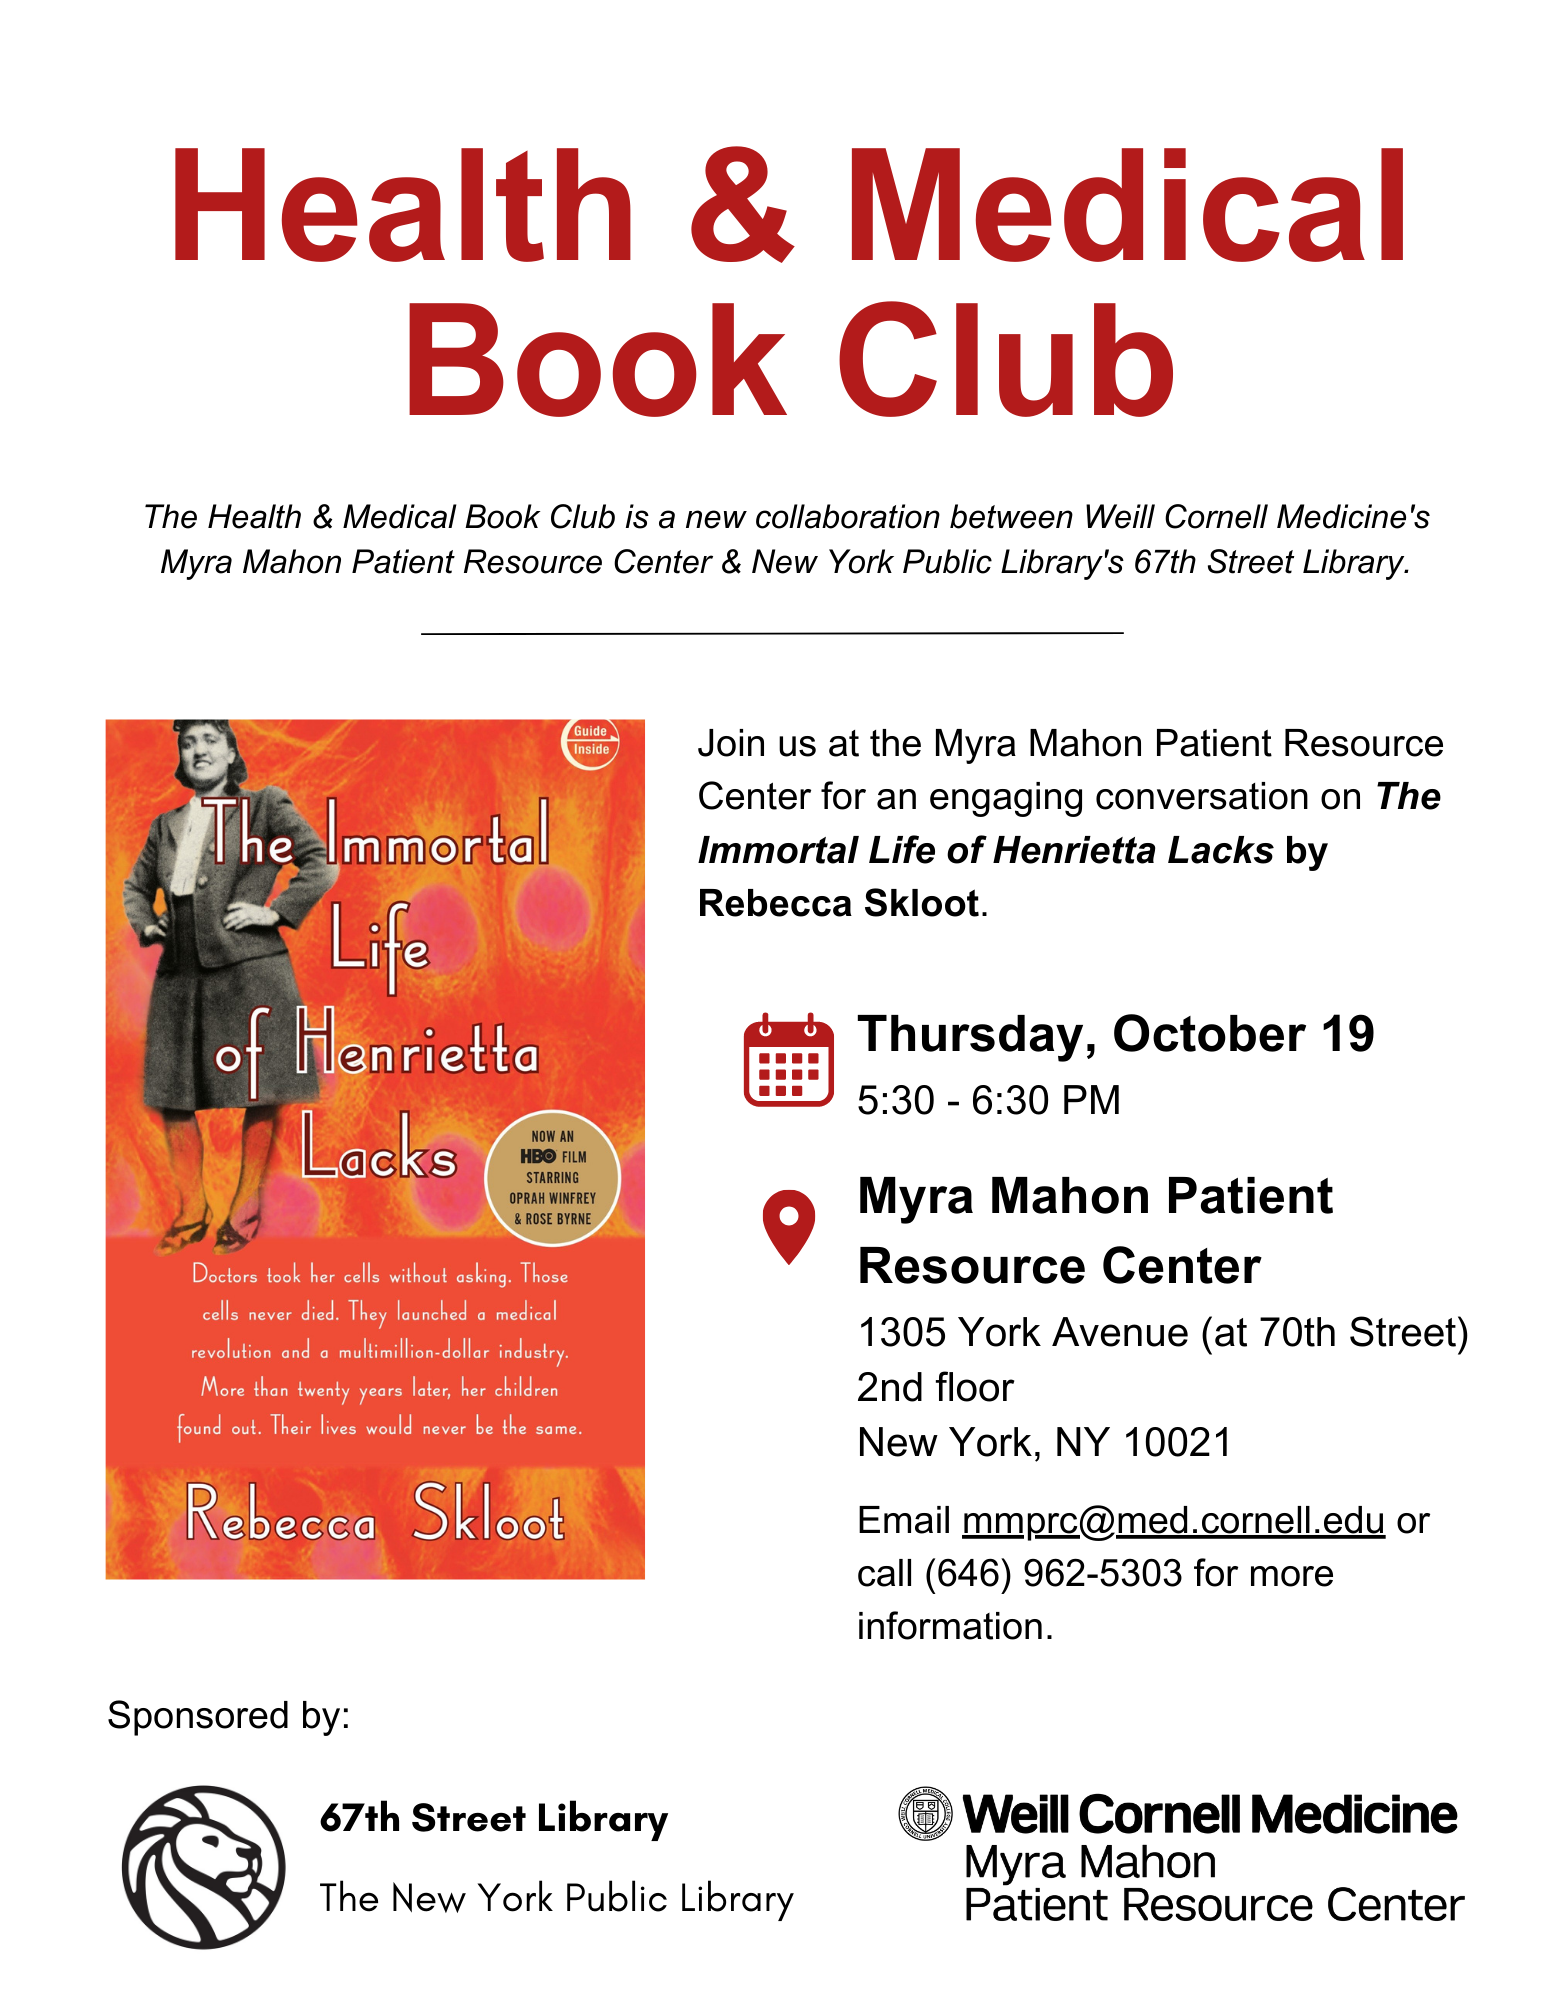 https://library.weill.cornell.edu/sites/default/files/news_images/immortal_life_book_club_flyer.png